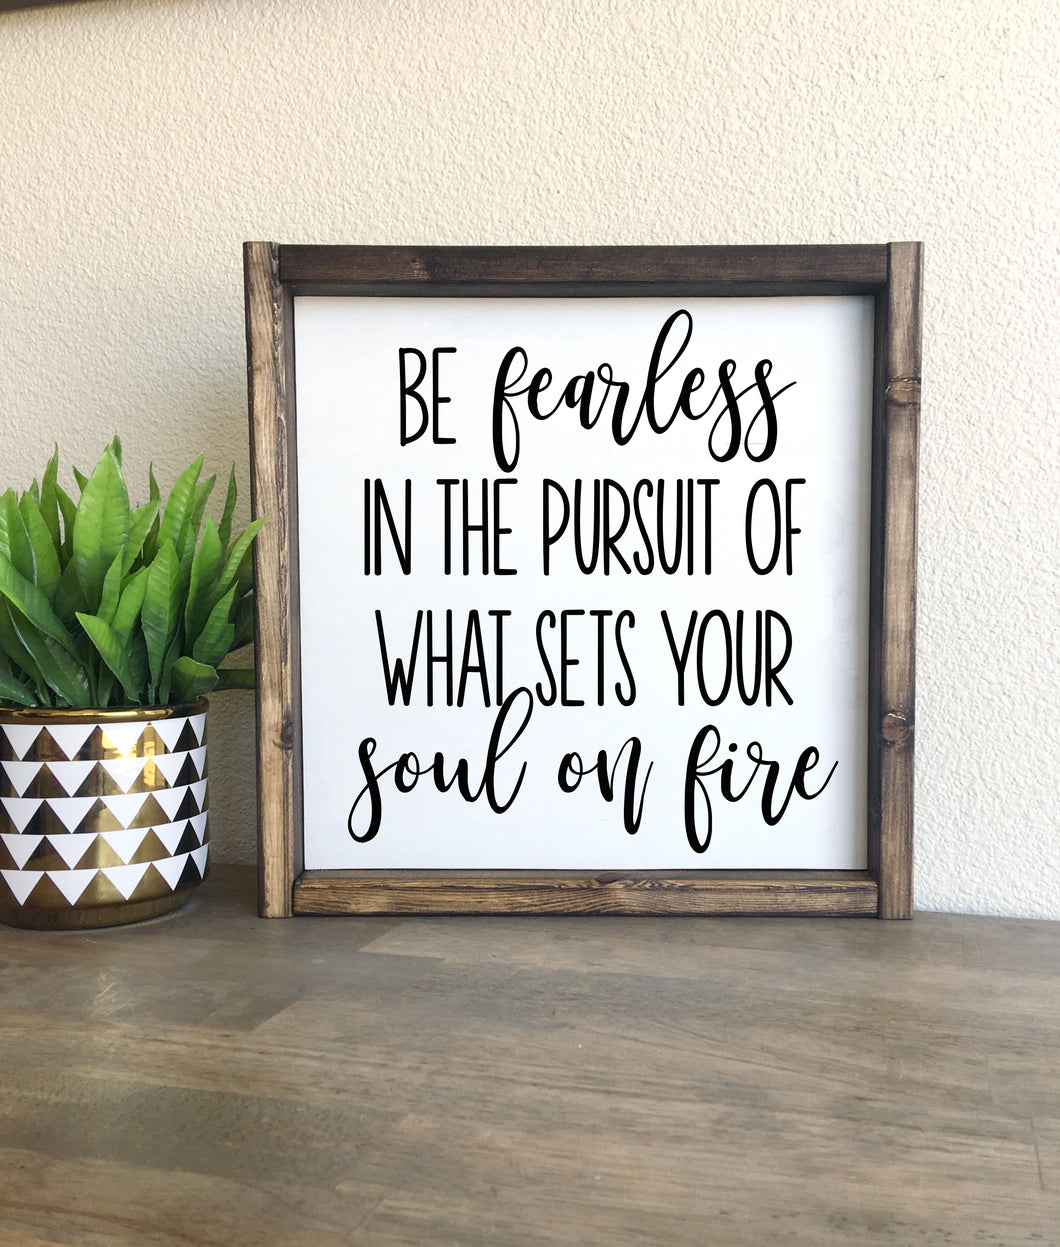 Be fearless | Framed wood sign